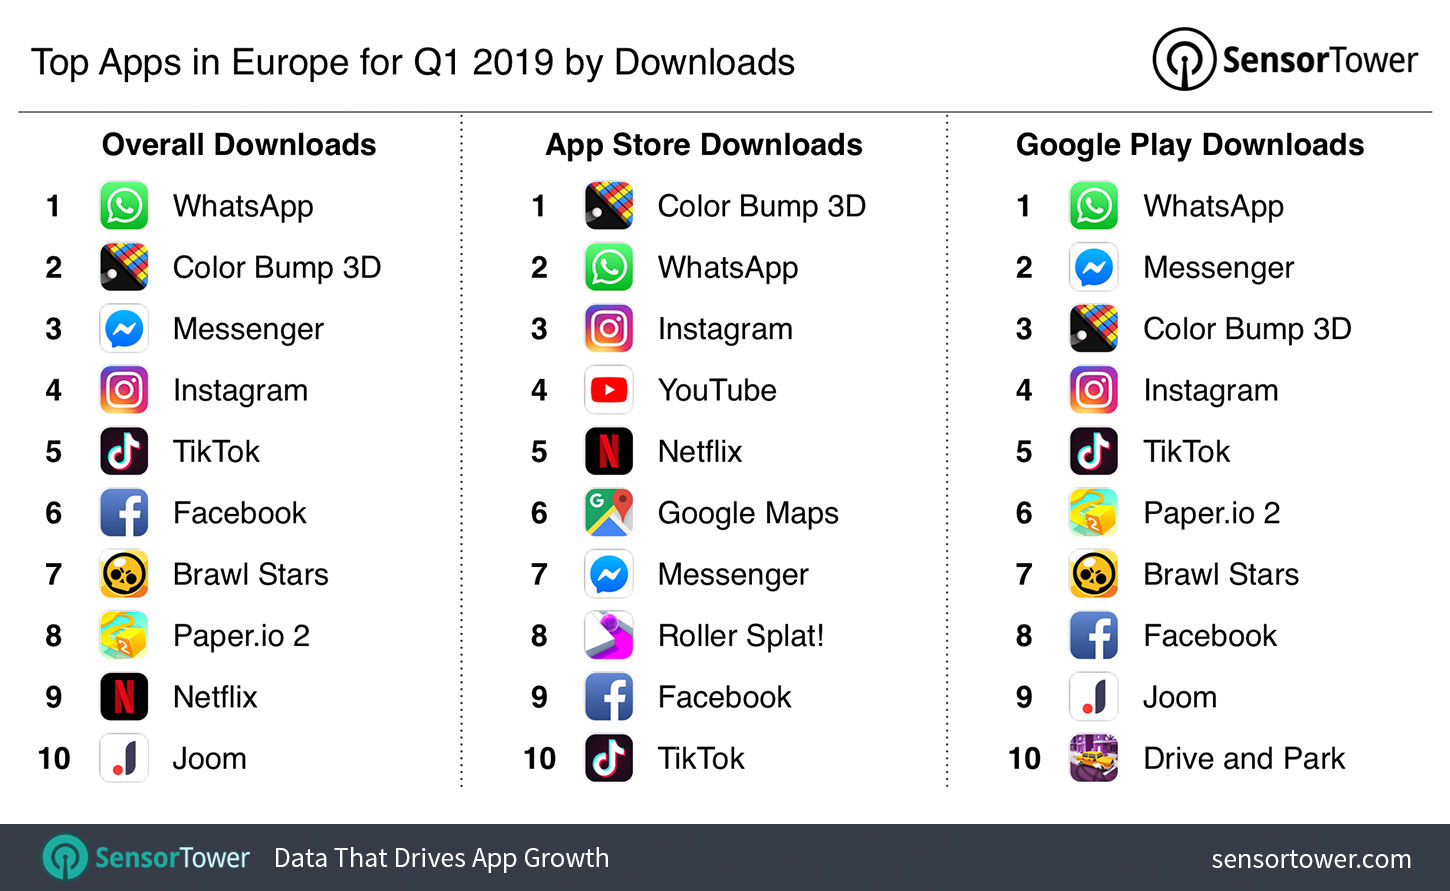 Top Apps in Europe for Q1 2019 by Downloads